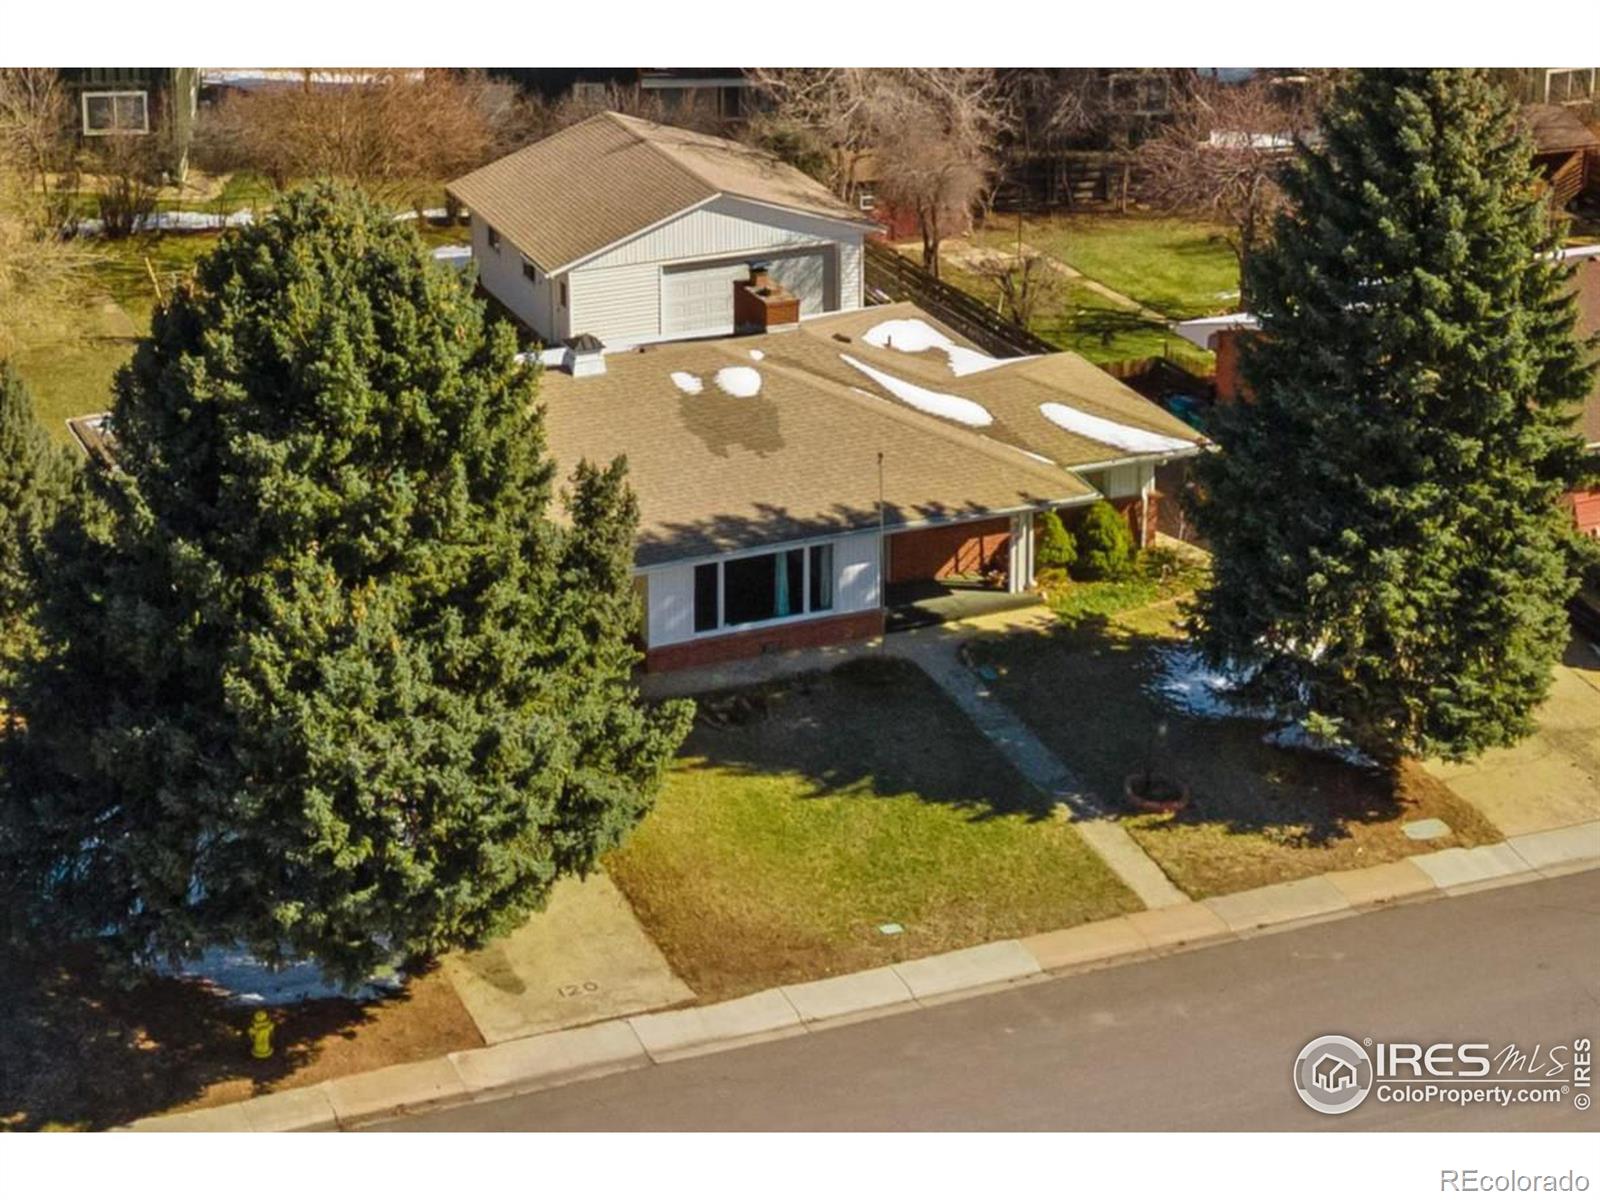 Report Image for 120  Rutgers Avenue,Fort Collins, Colorado